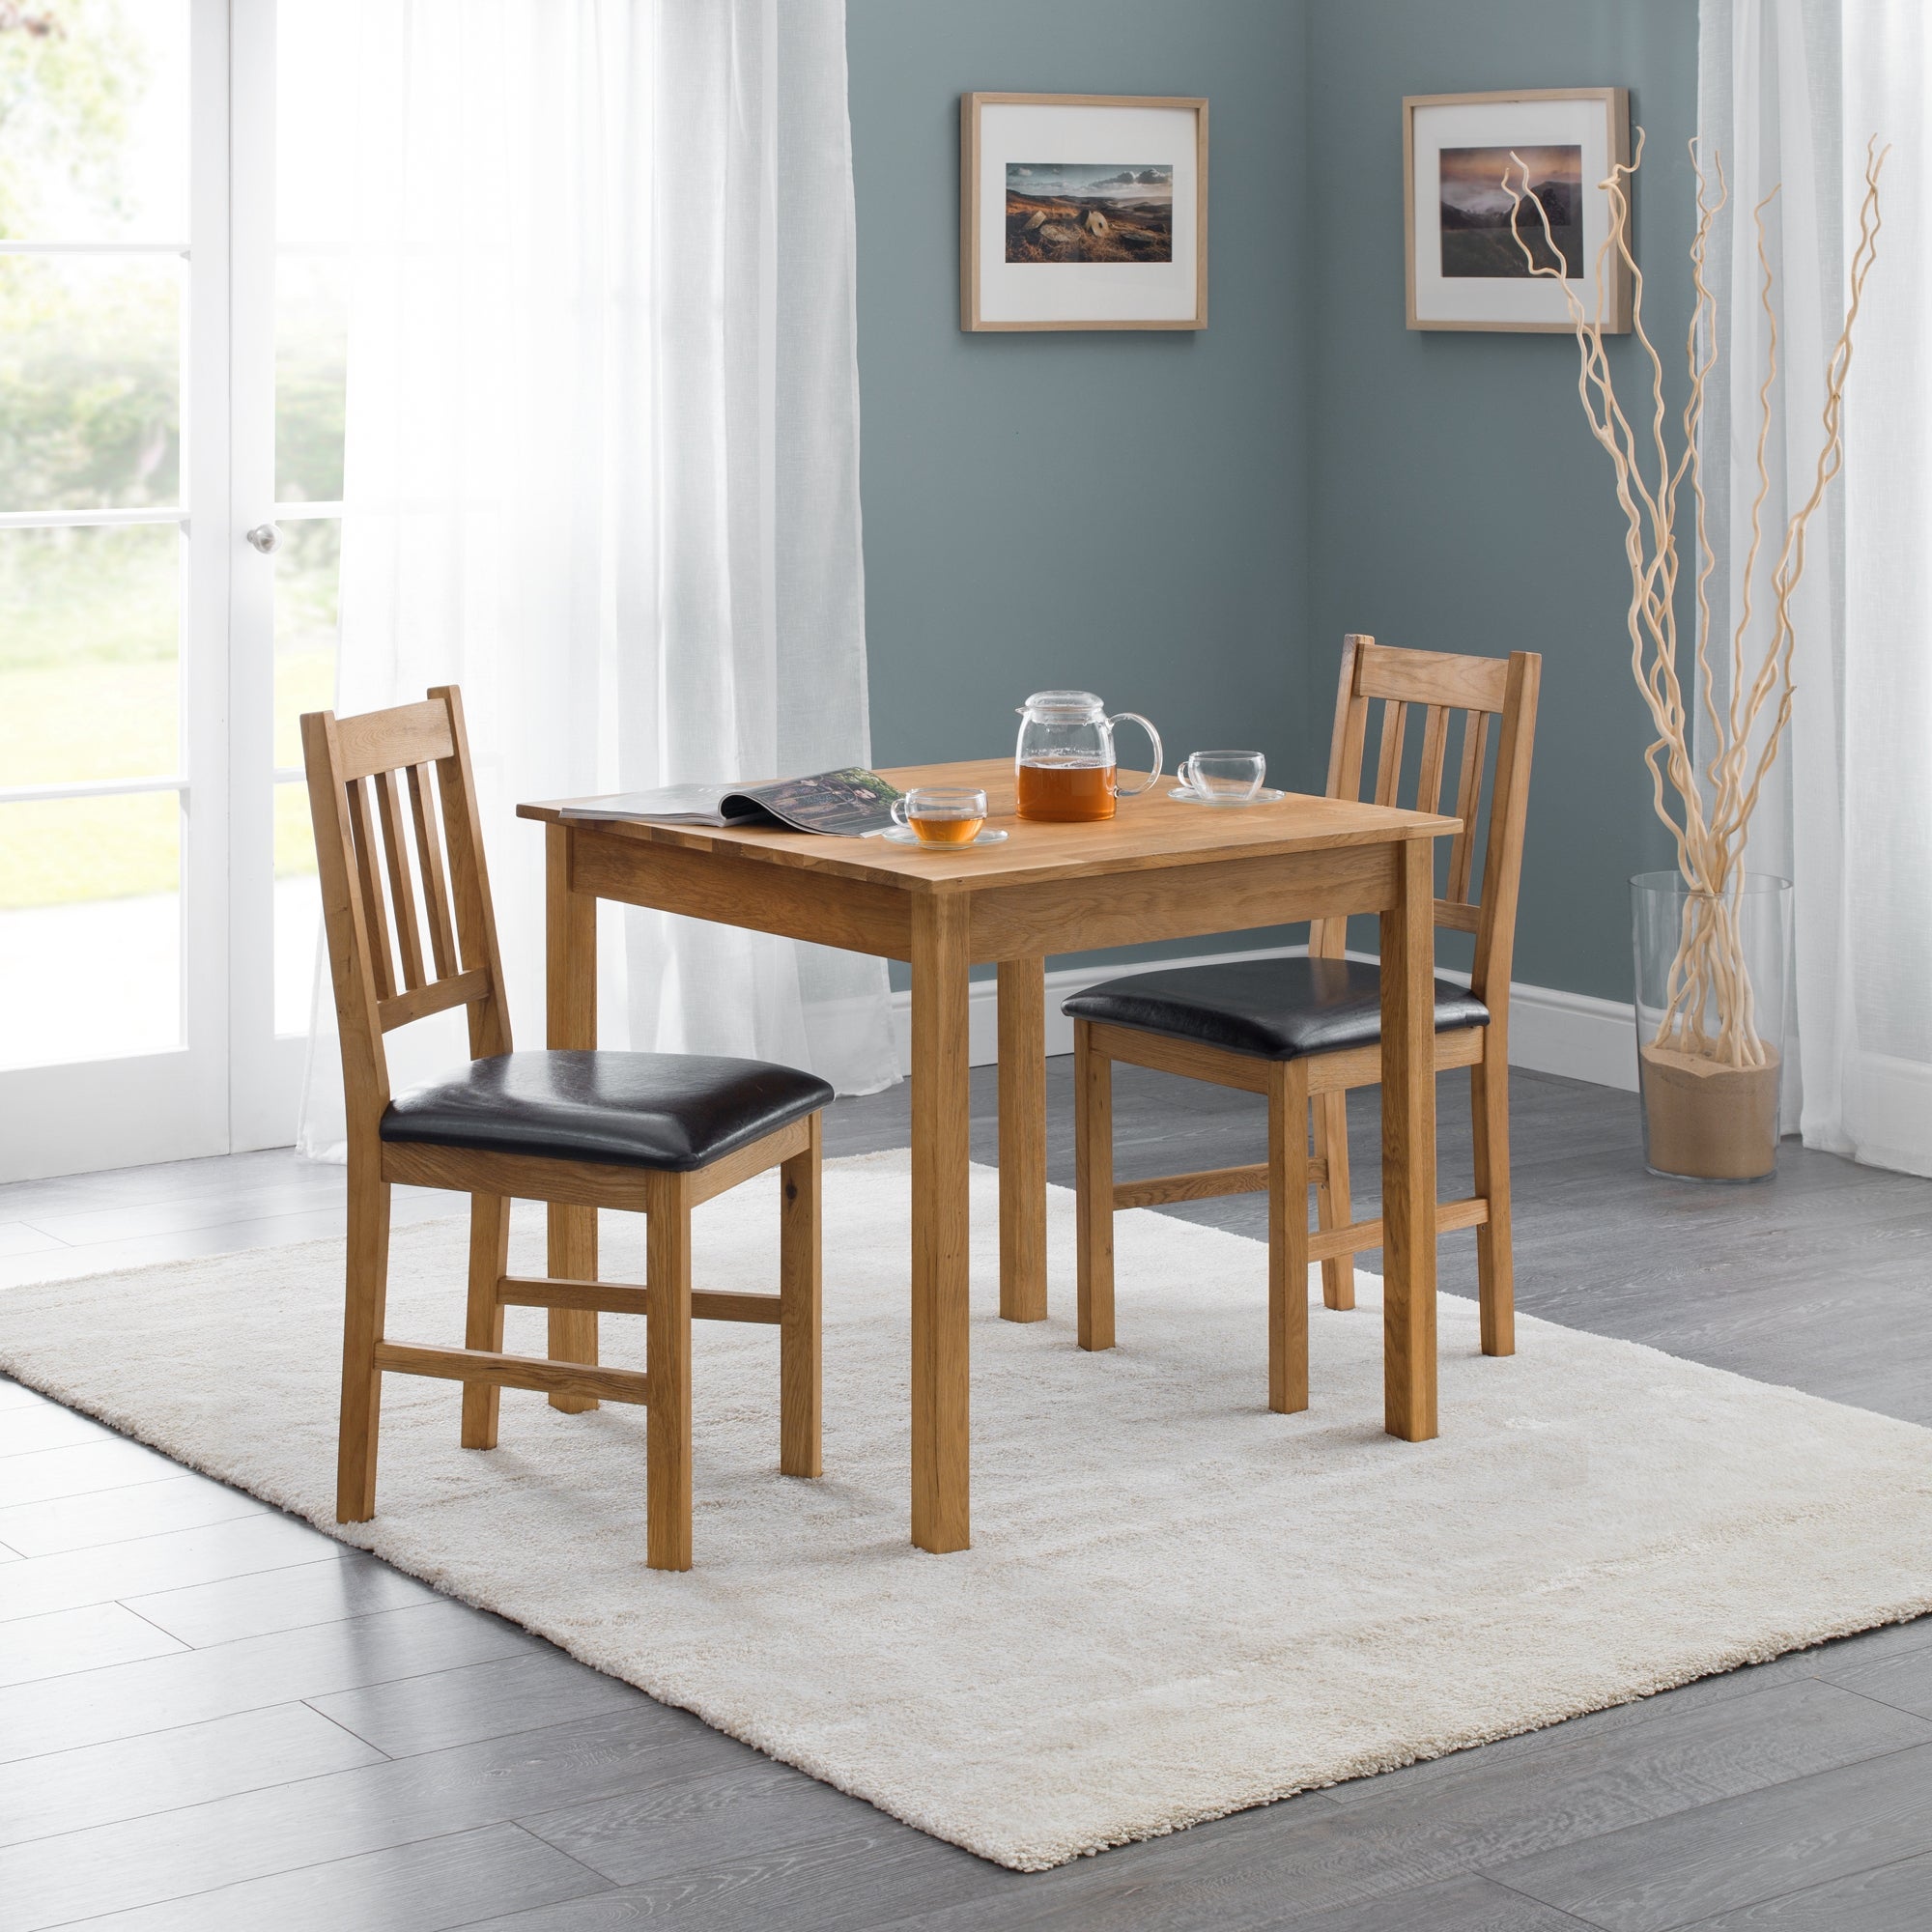 Coxmoor 4 Seater Square Dining Table Solid Oak Brown